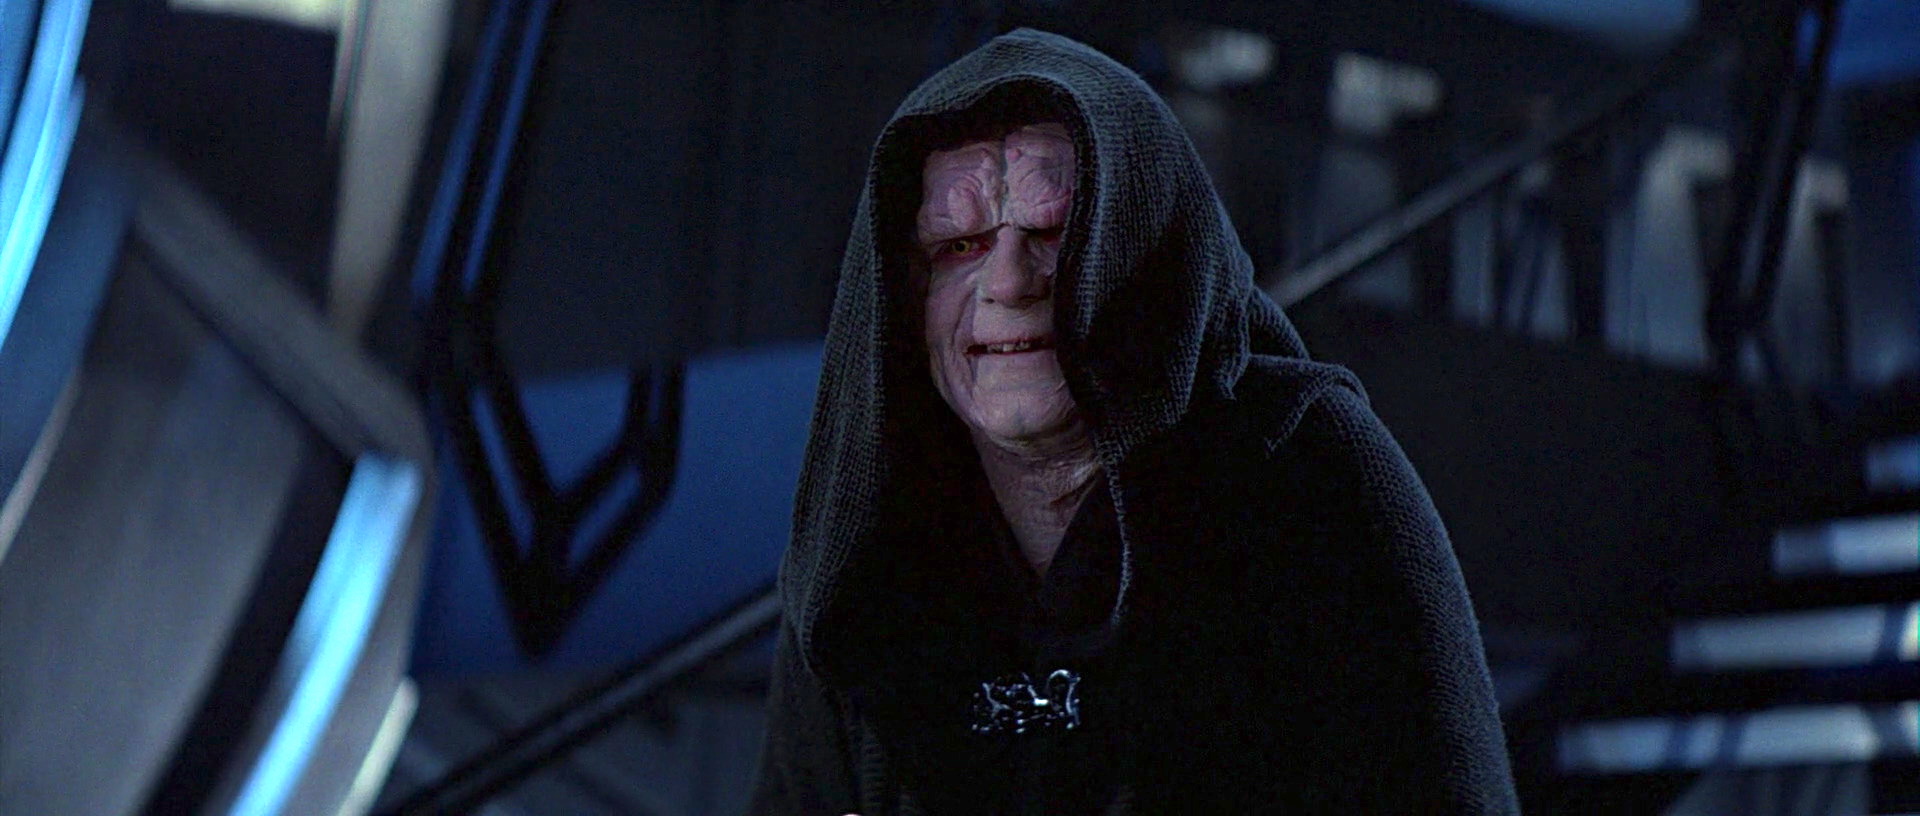 emperor palpatine giggles aboard the Death Star